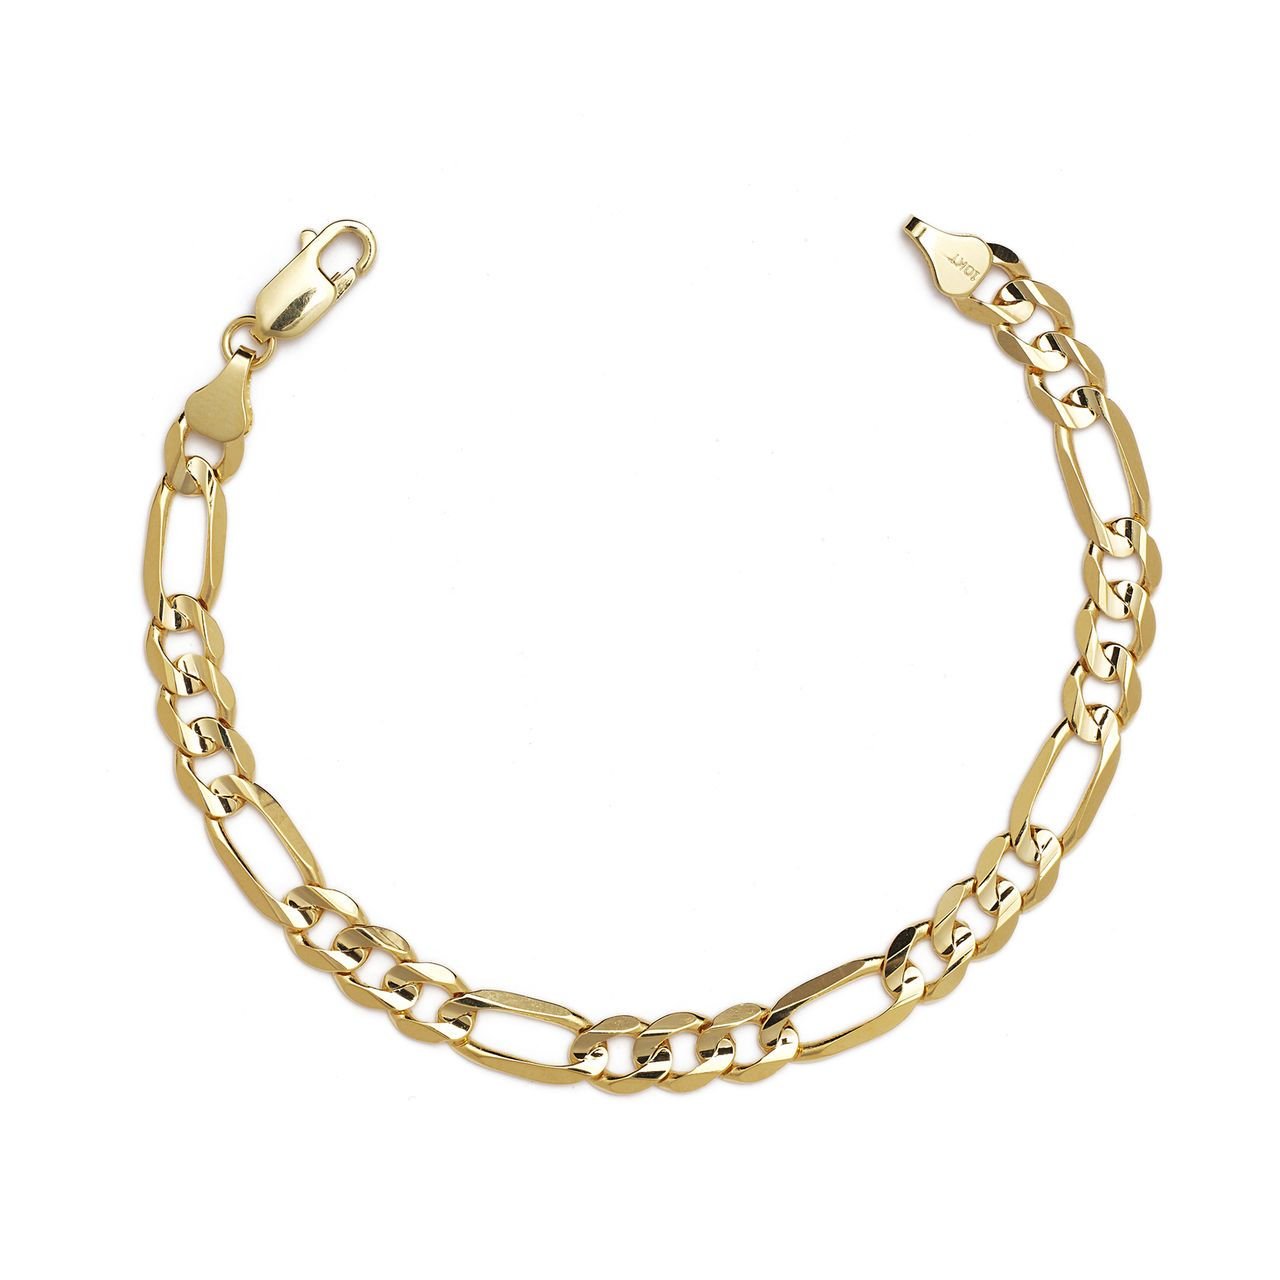 10k Yellow Gold Figaro Chain Bracelet with Concave Look, 0.35 Inch (9mm)